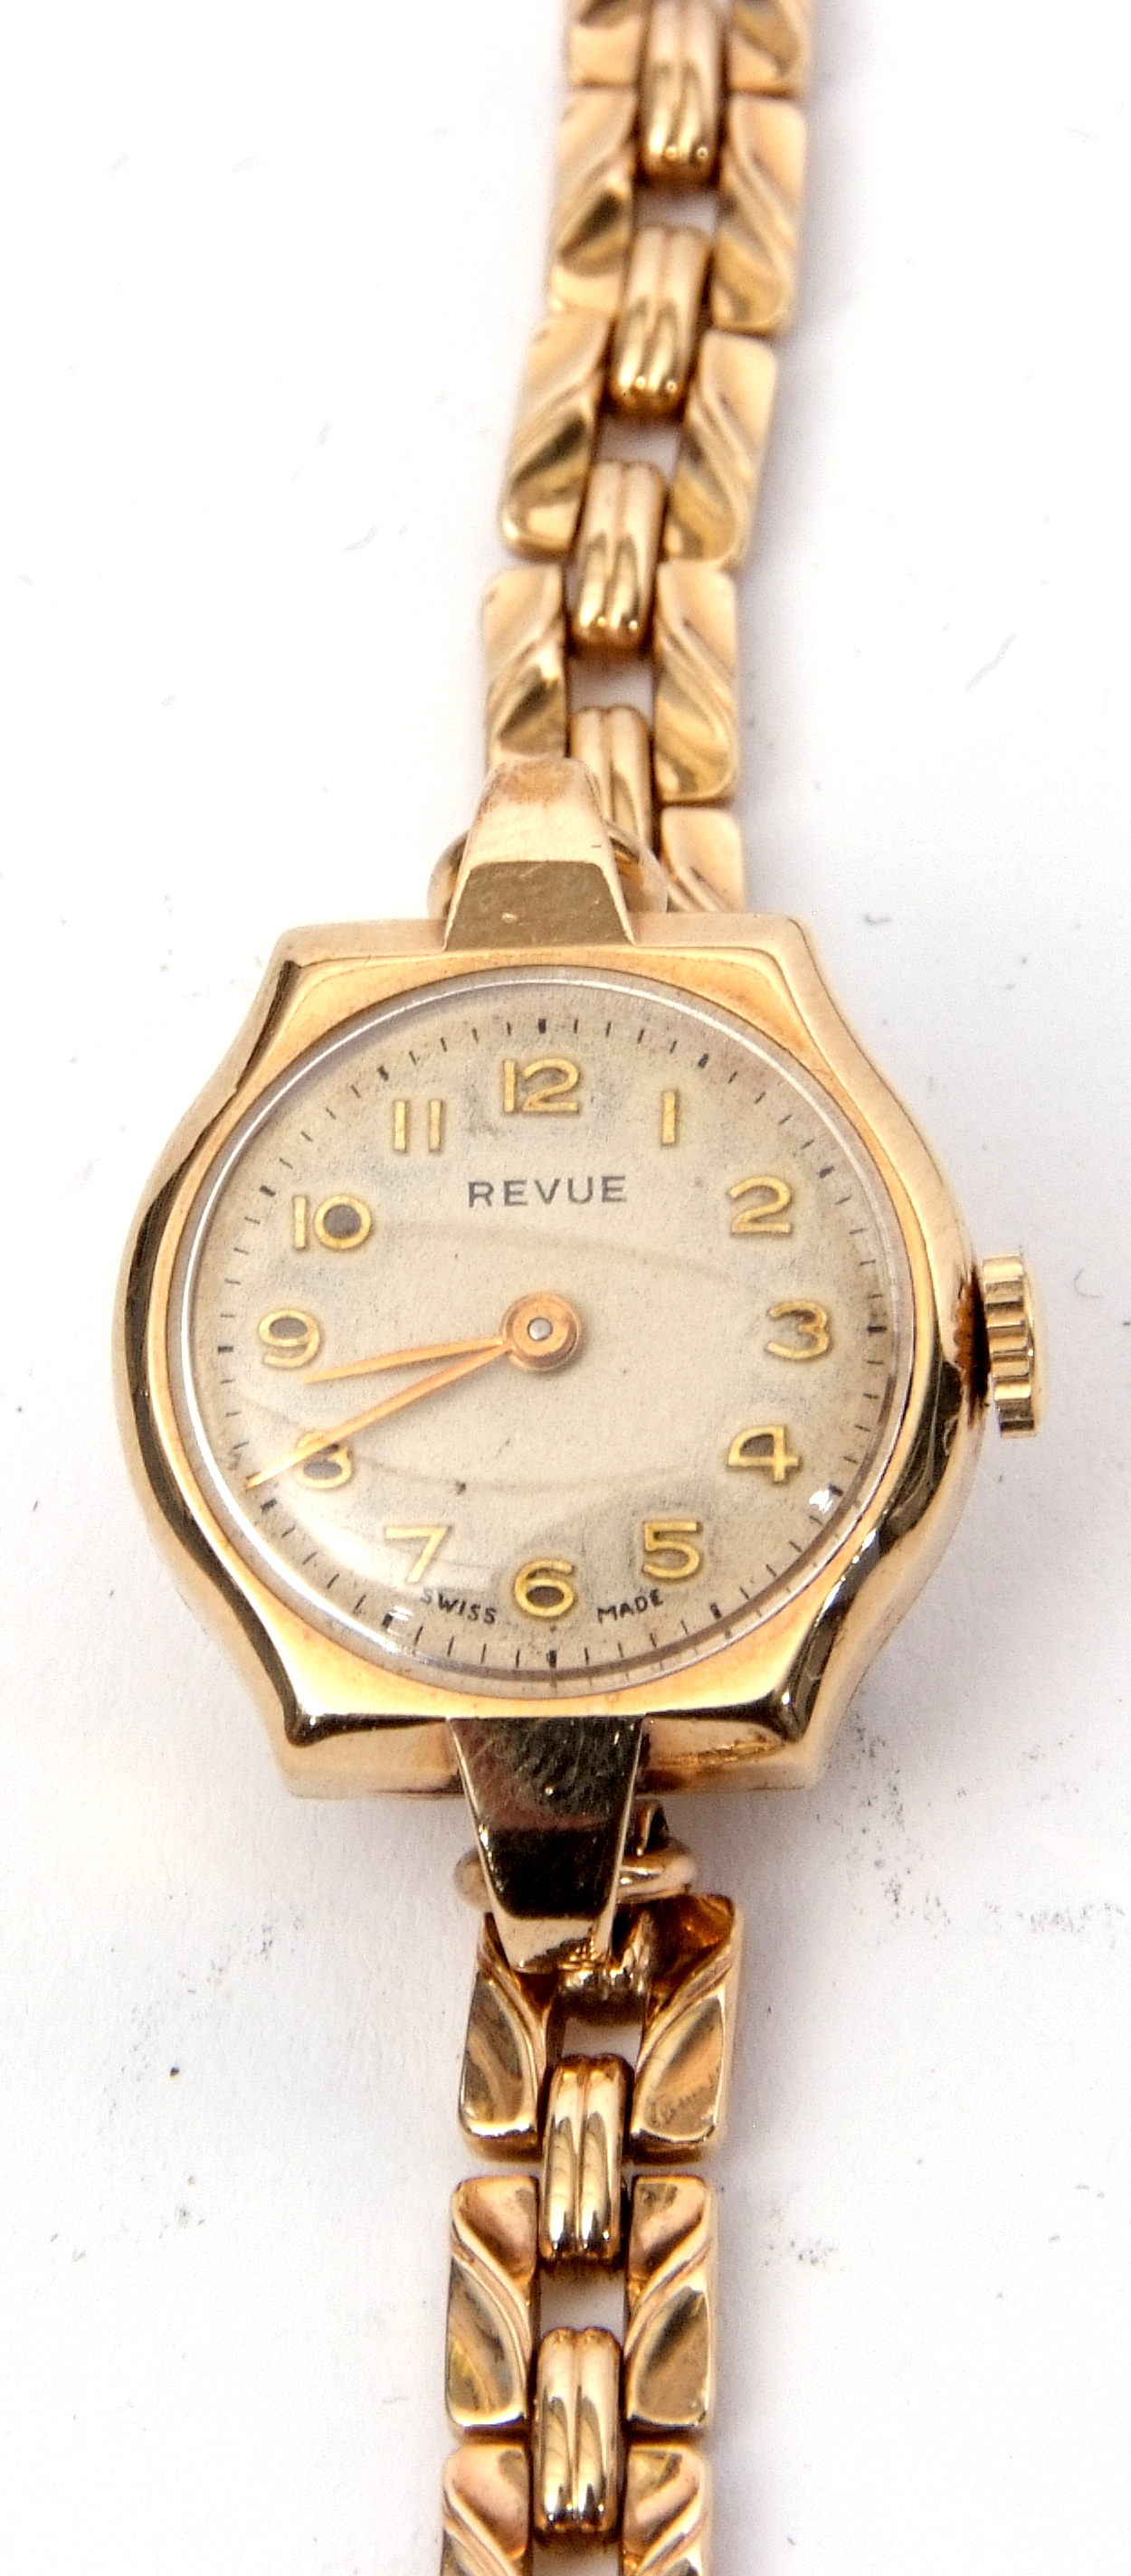 Ladies 9ct gold cased Revue wrist watch with gold hands to a cream coloured dial with raised gold - Image 4 of 4